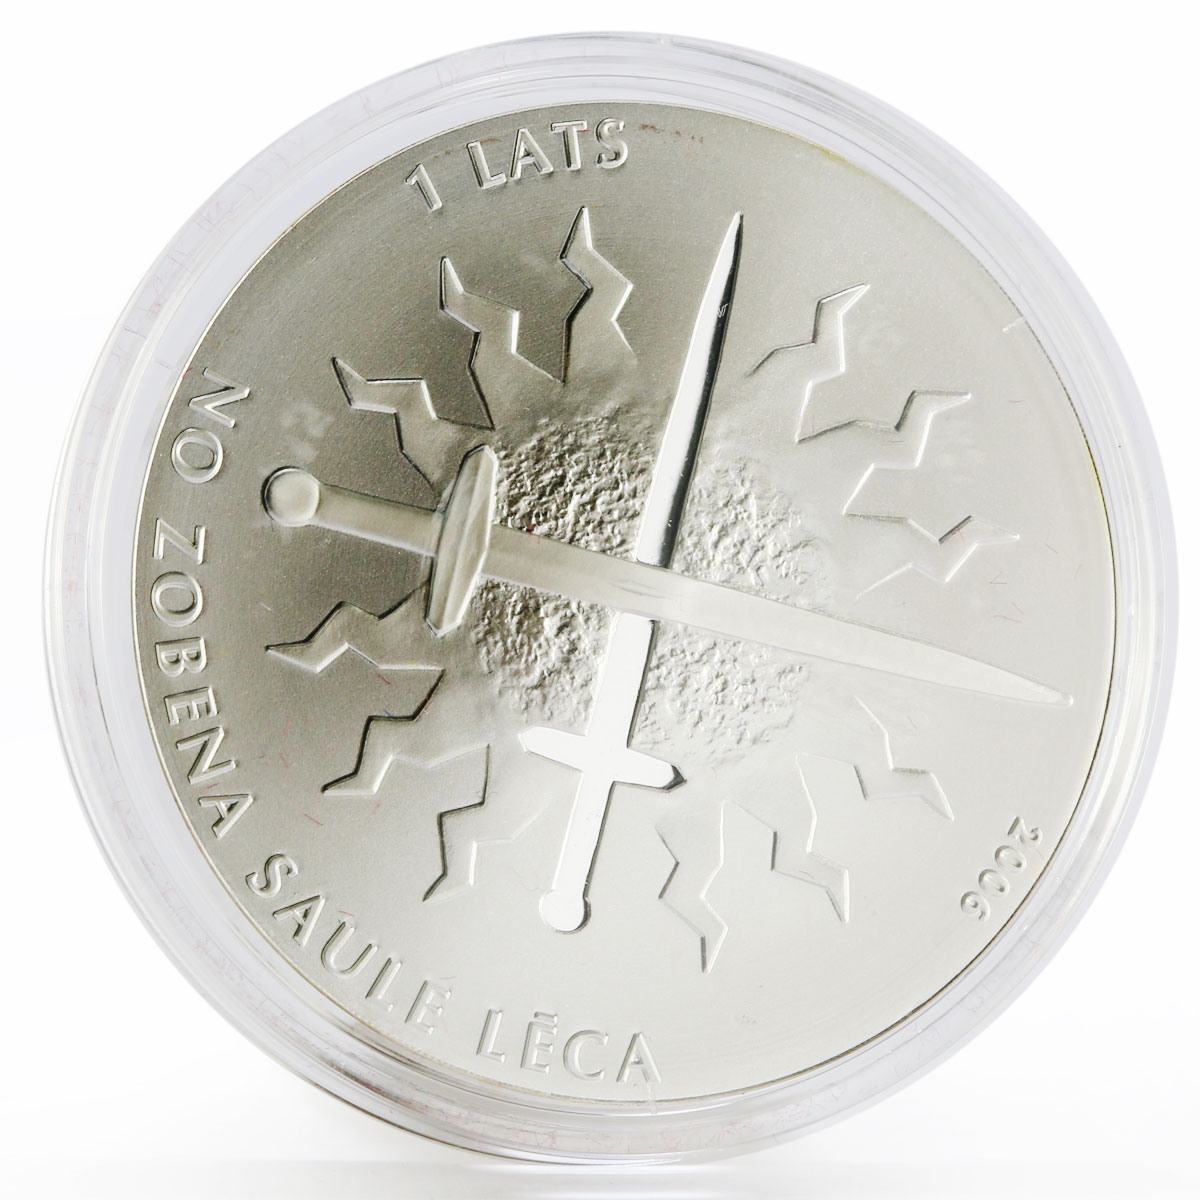 Latvia 1 lats State series Fight for Freedom proof silver coin 2006